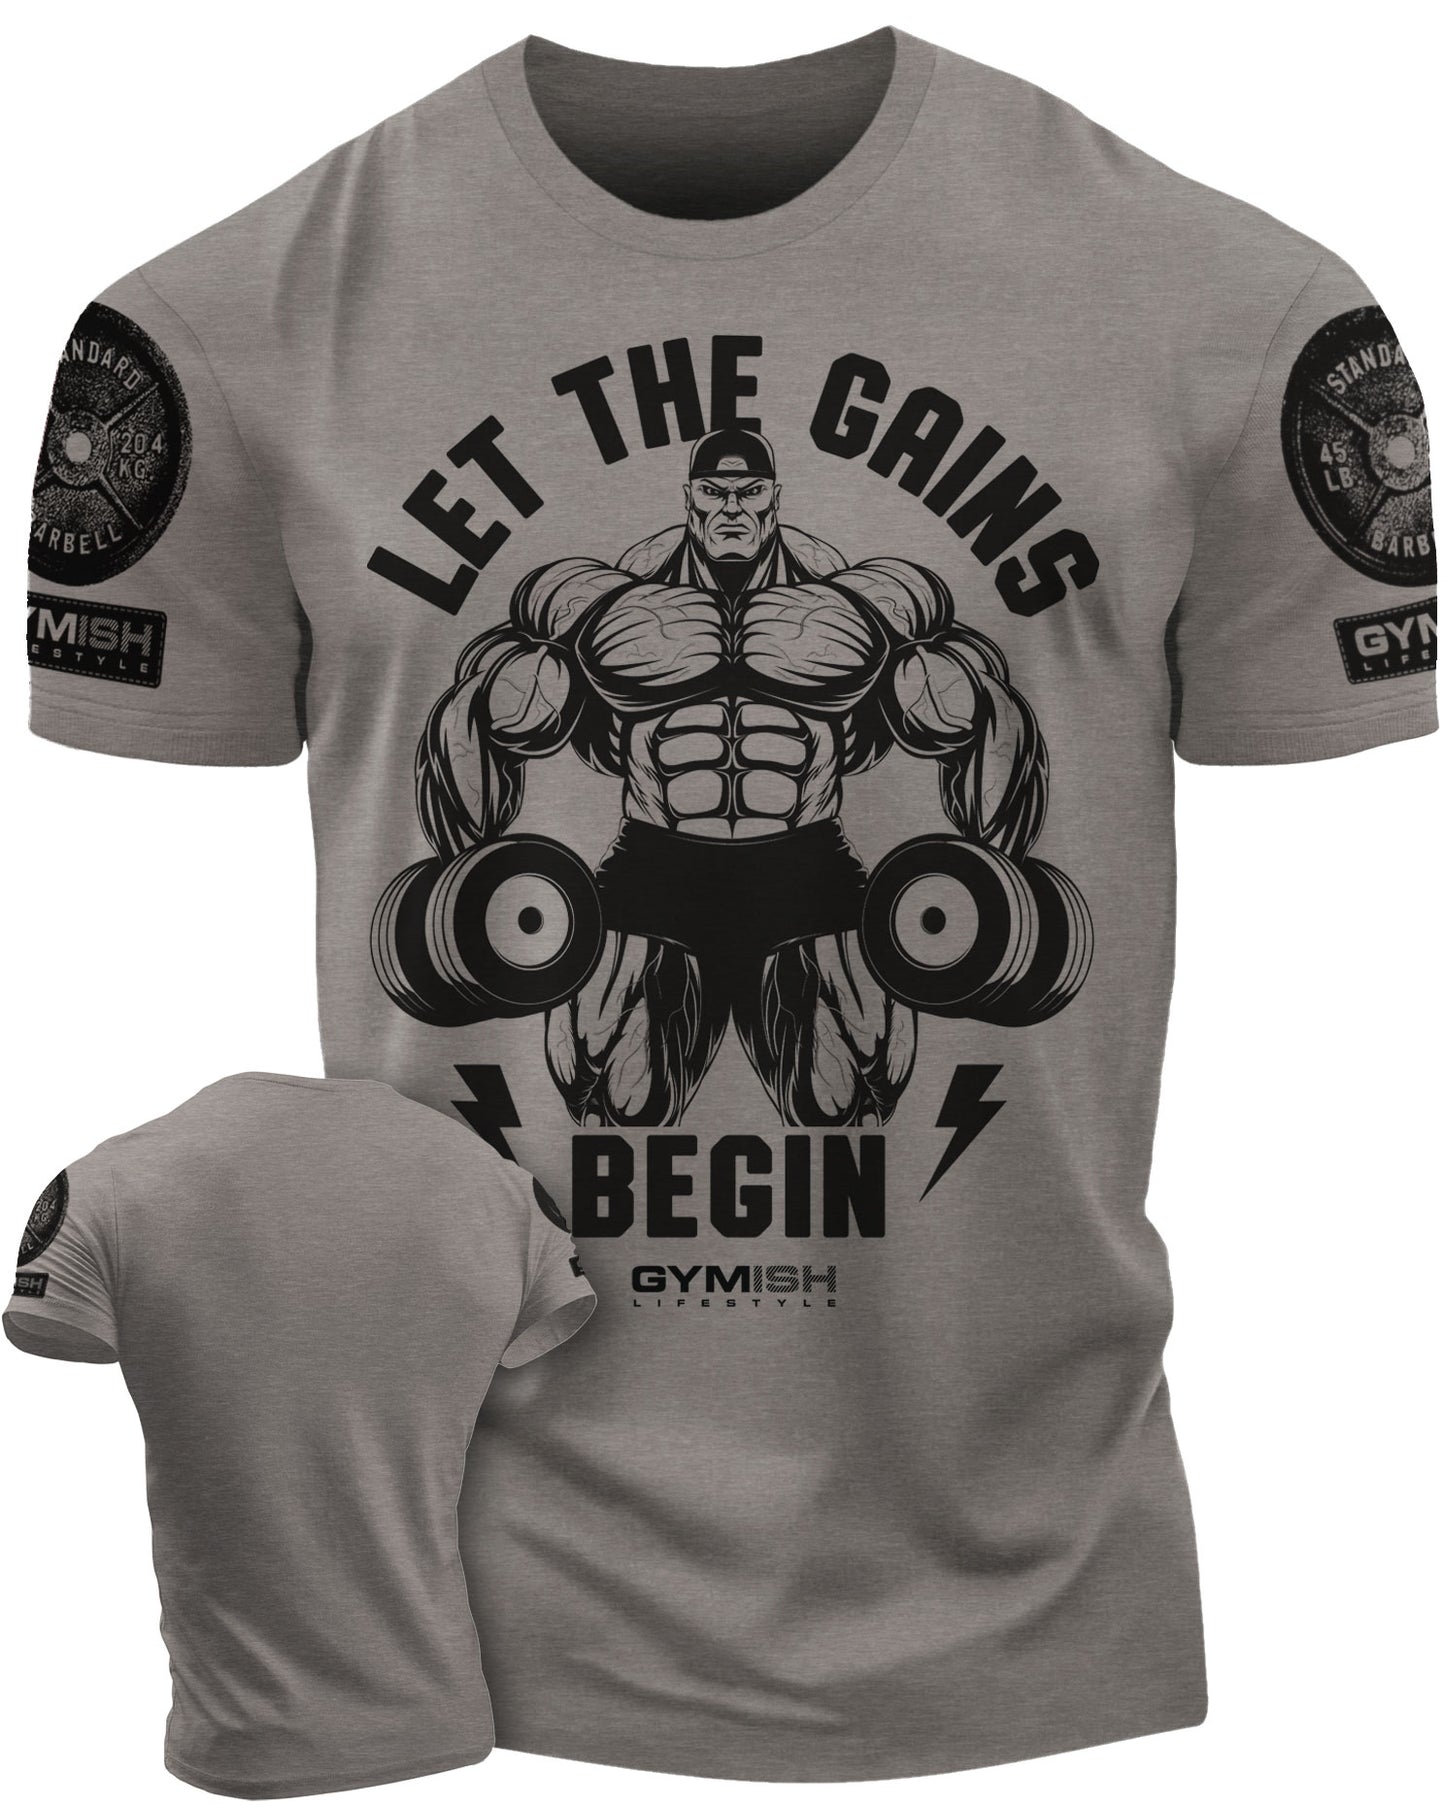 031. Let The Gains Begin Workout T-Shirt